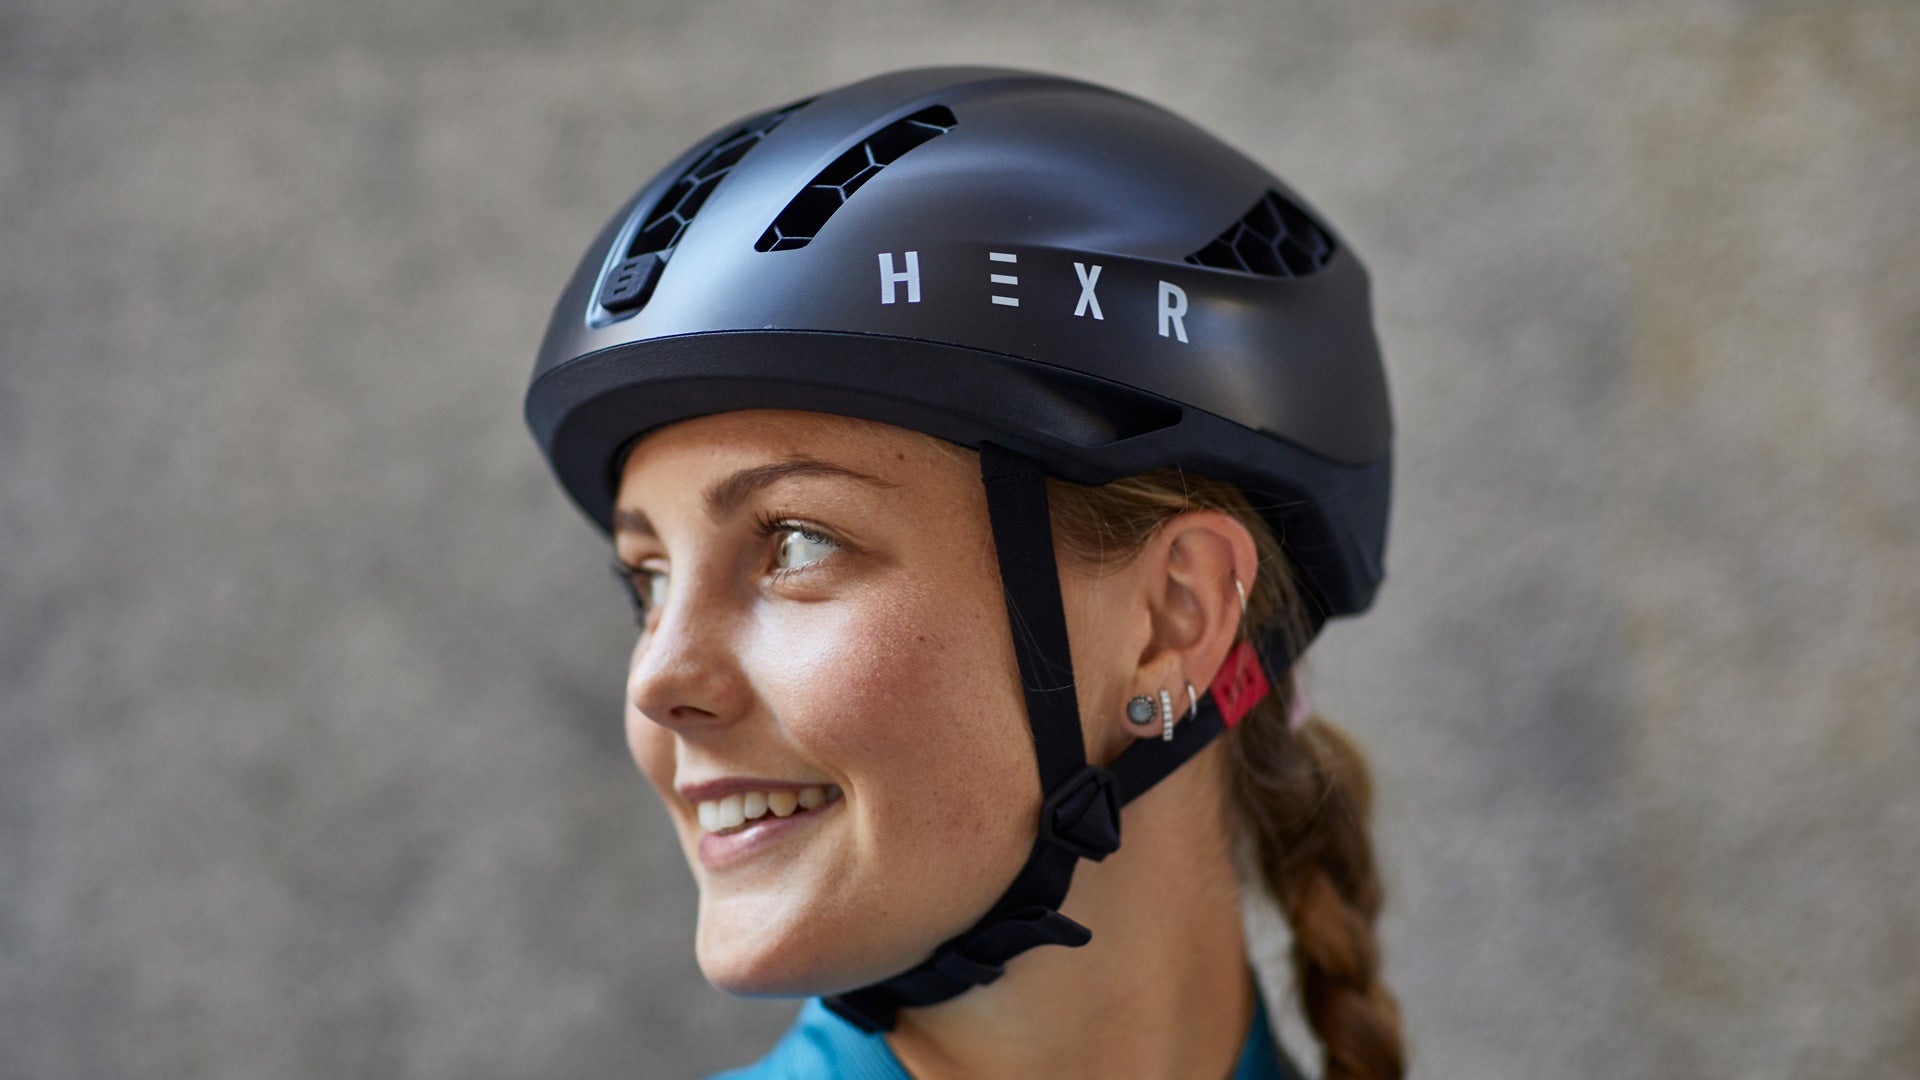 Woman smiling and wearing a HEXR helmet.